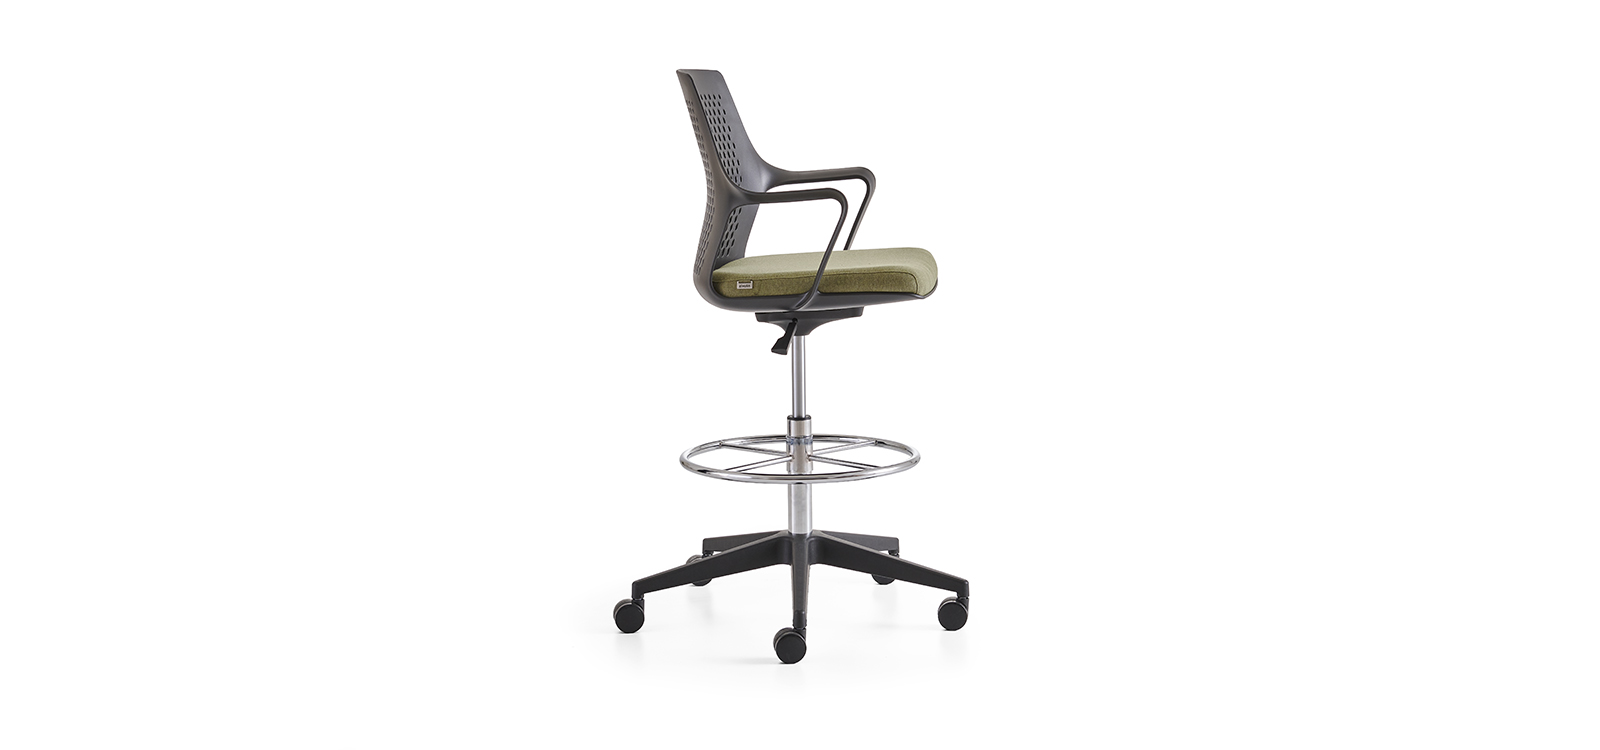 Flat High Office Chair | Zivella Office Furnitures